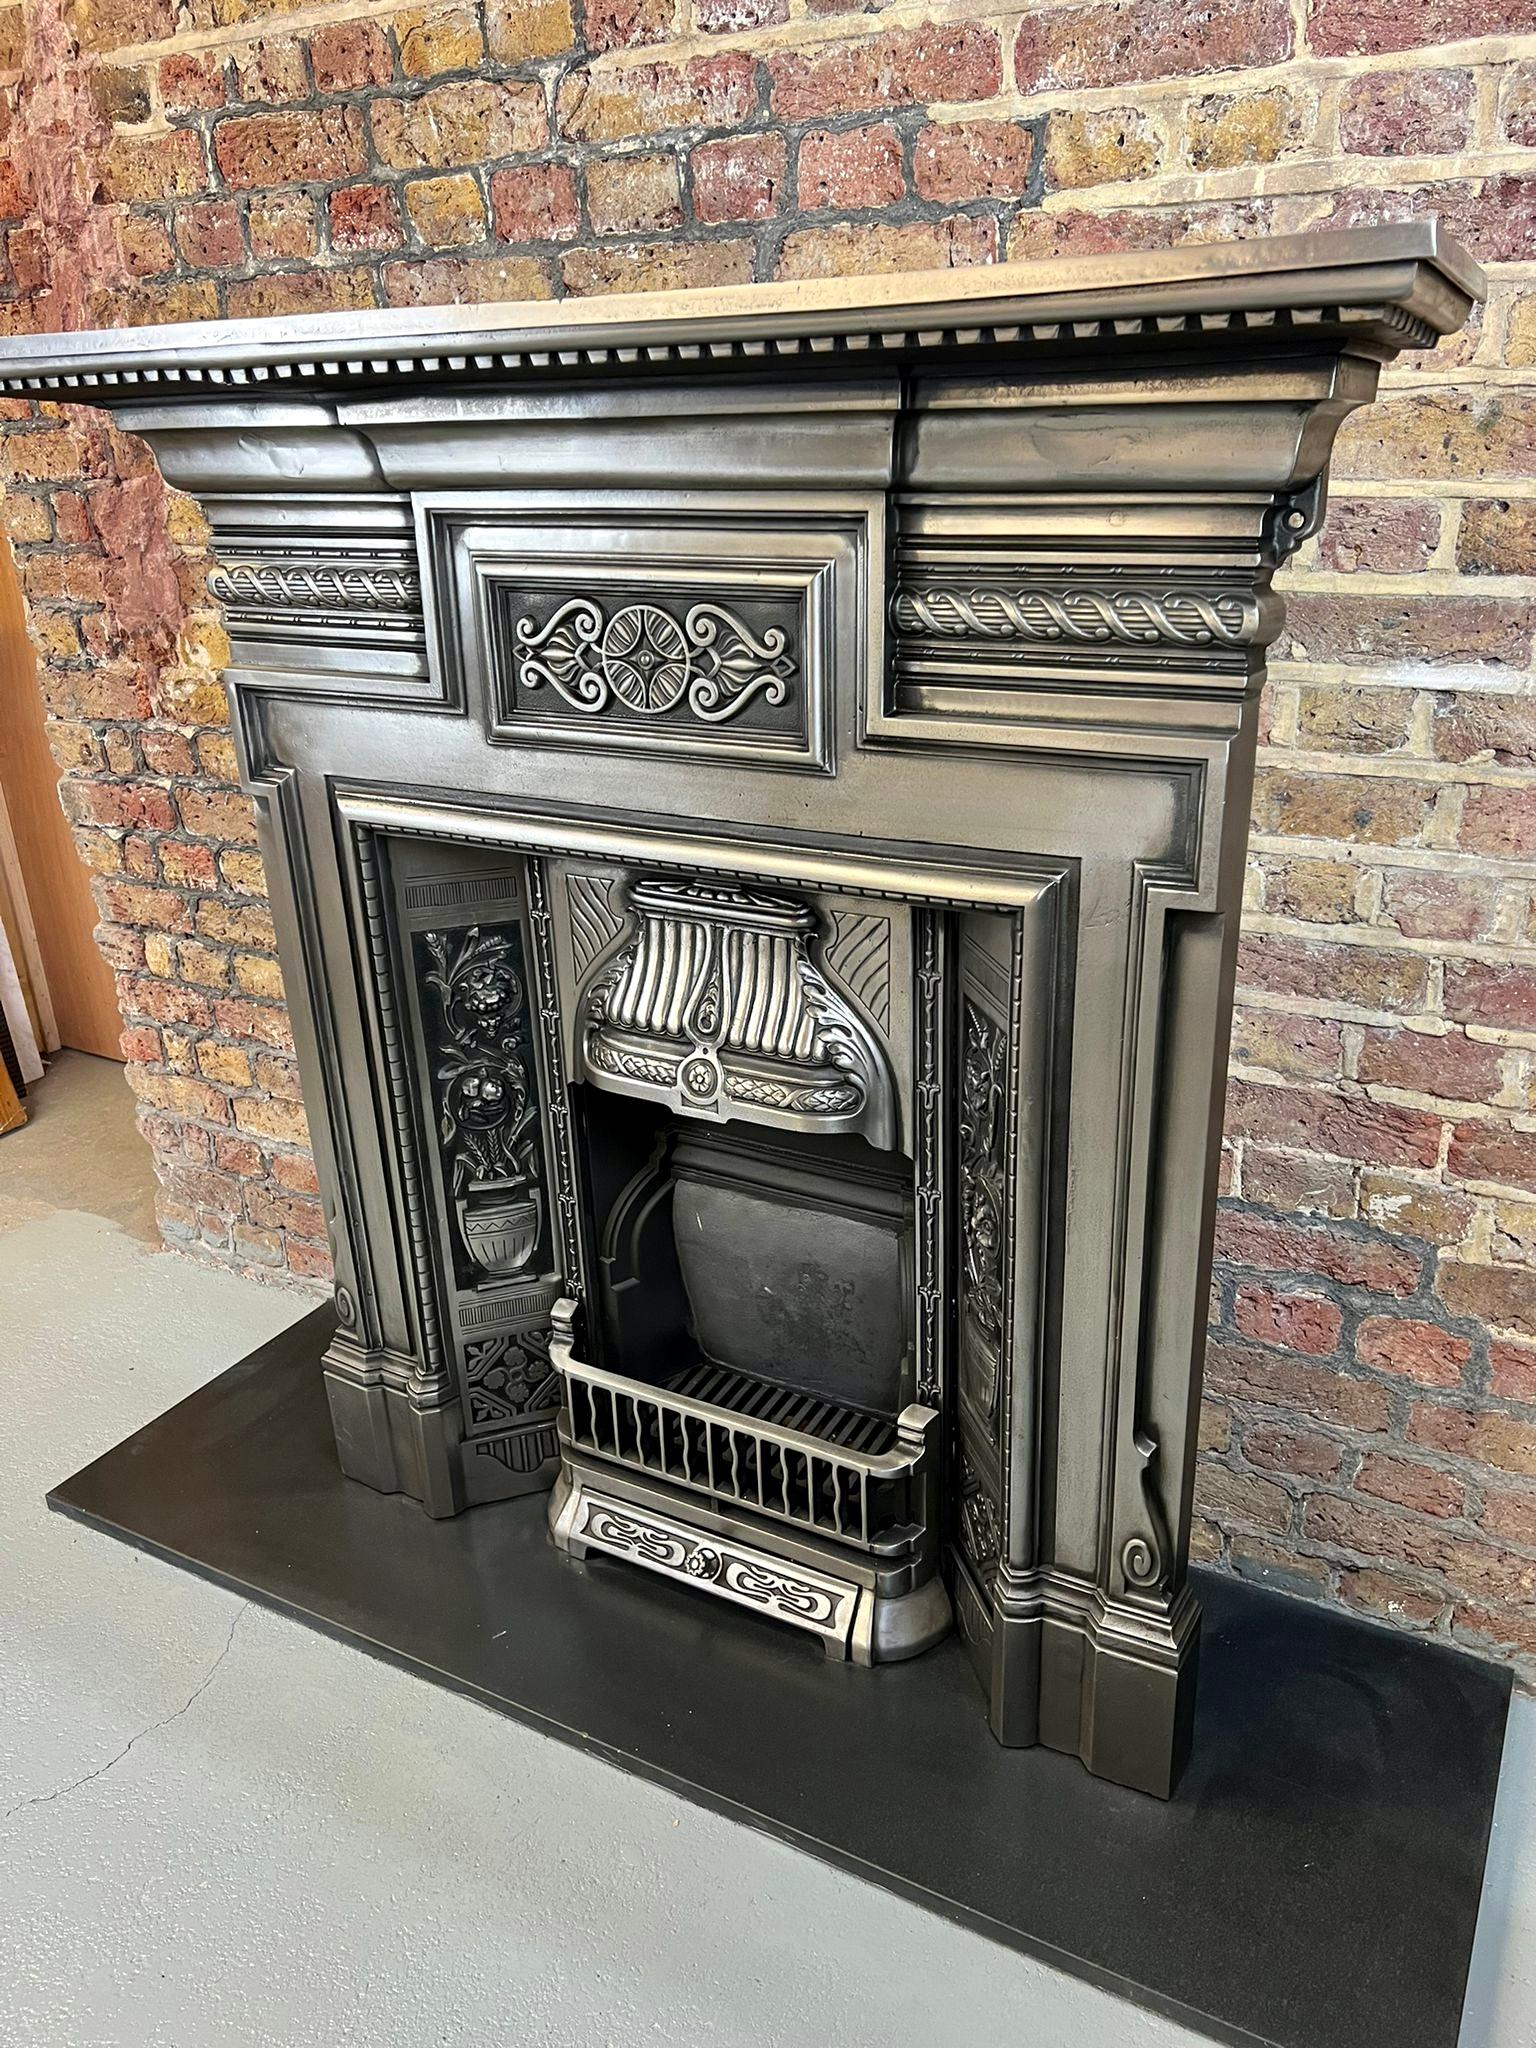 19th century Victorian cast iron burnished combination fireplace.
Original antique fireplace in a polished (burnished) finish with set of floral side panels, cast iron back, bars and canopy hood. Recently salvaged & restored from a London town